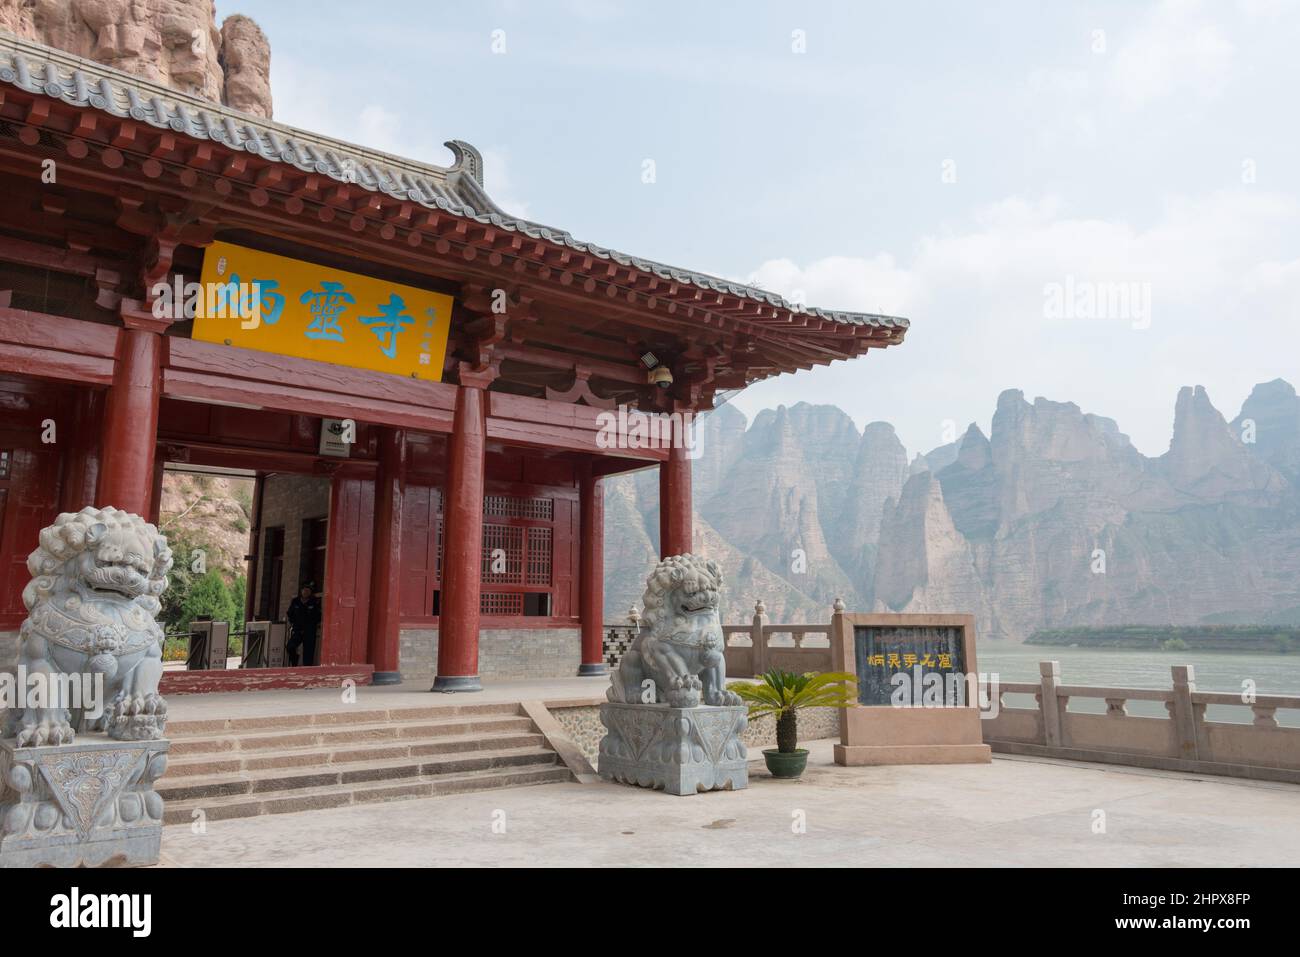 LANZHOU, CHINA - Bingling Cave Temple(UNESCO World heritage site). a famous Temple in Lanzhou, Gansu, China. Stock Photo